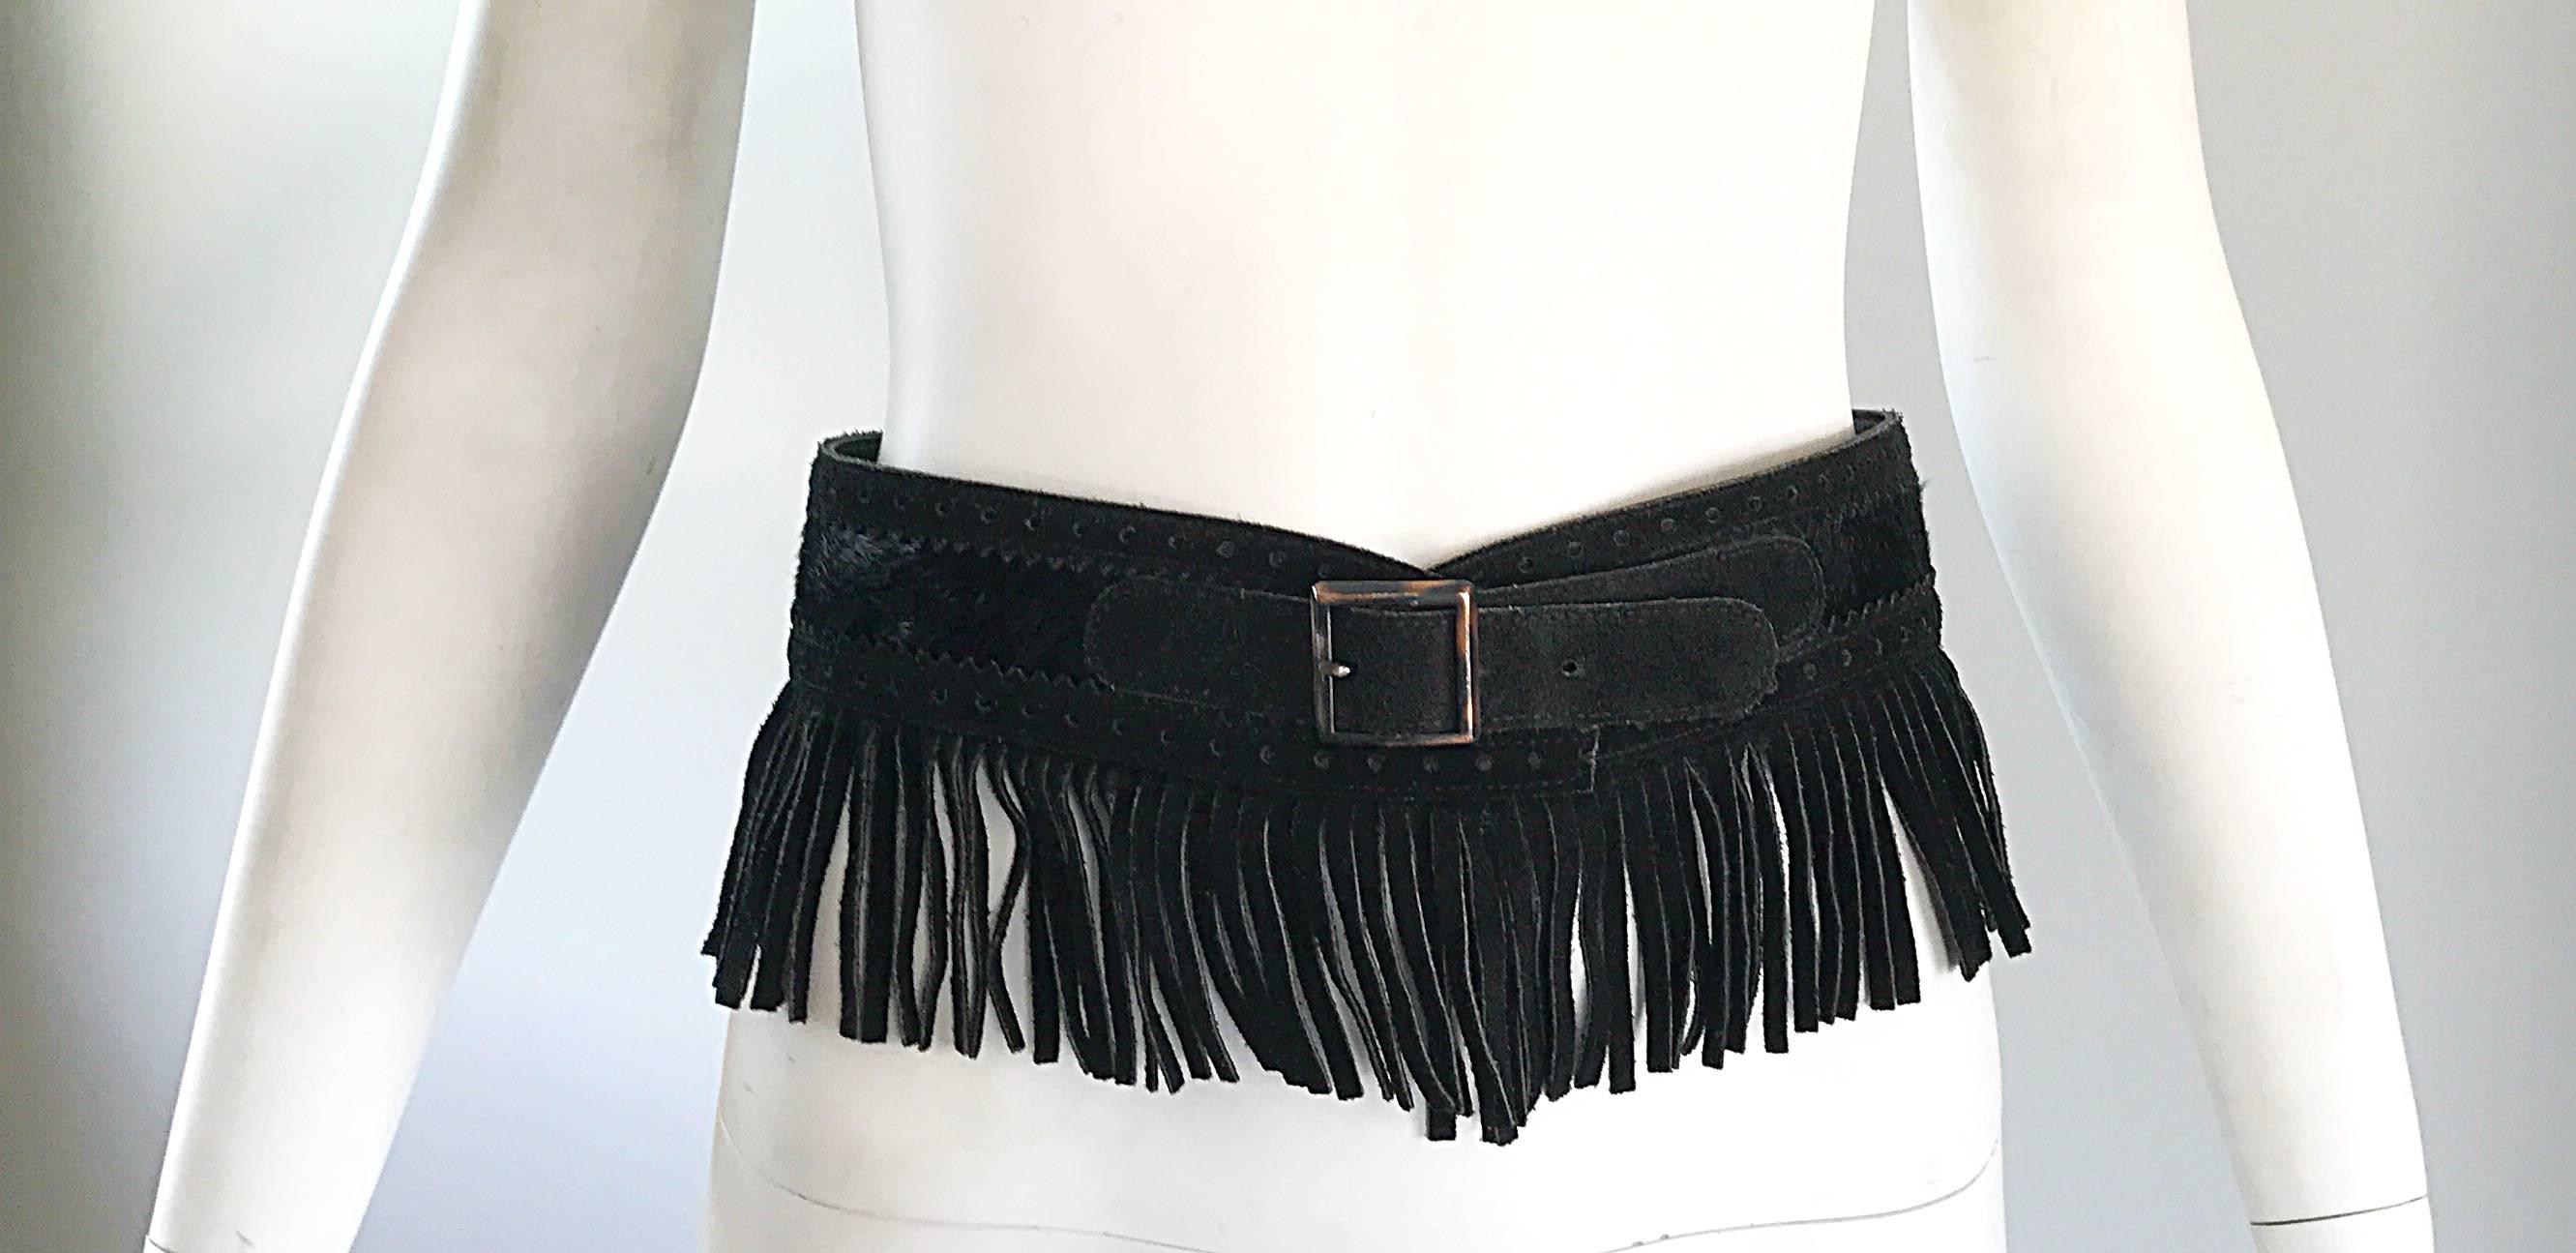 Rare, and so chic vintage YSL black leather suede + calf / pony hair wide fringed belt! Features black perforated suede trim, with a center calfhair in the middle. The fringe is cut from the actual belt, not sewn on. Impeccable quality with so much